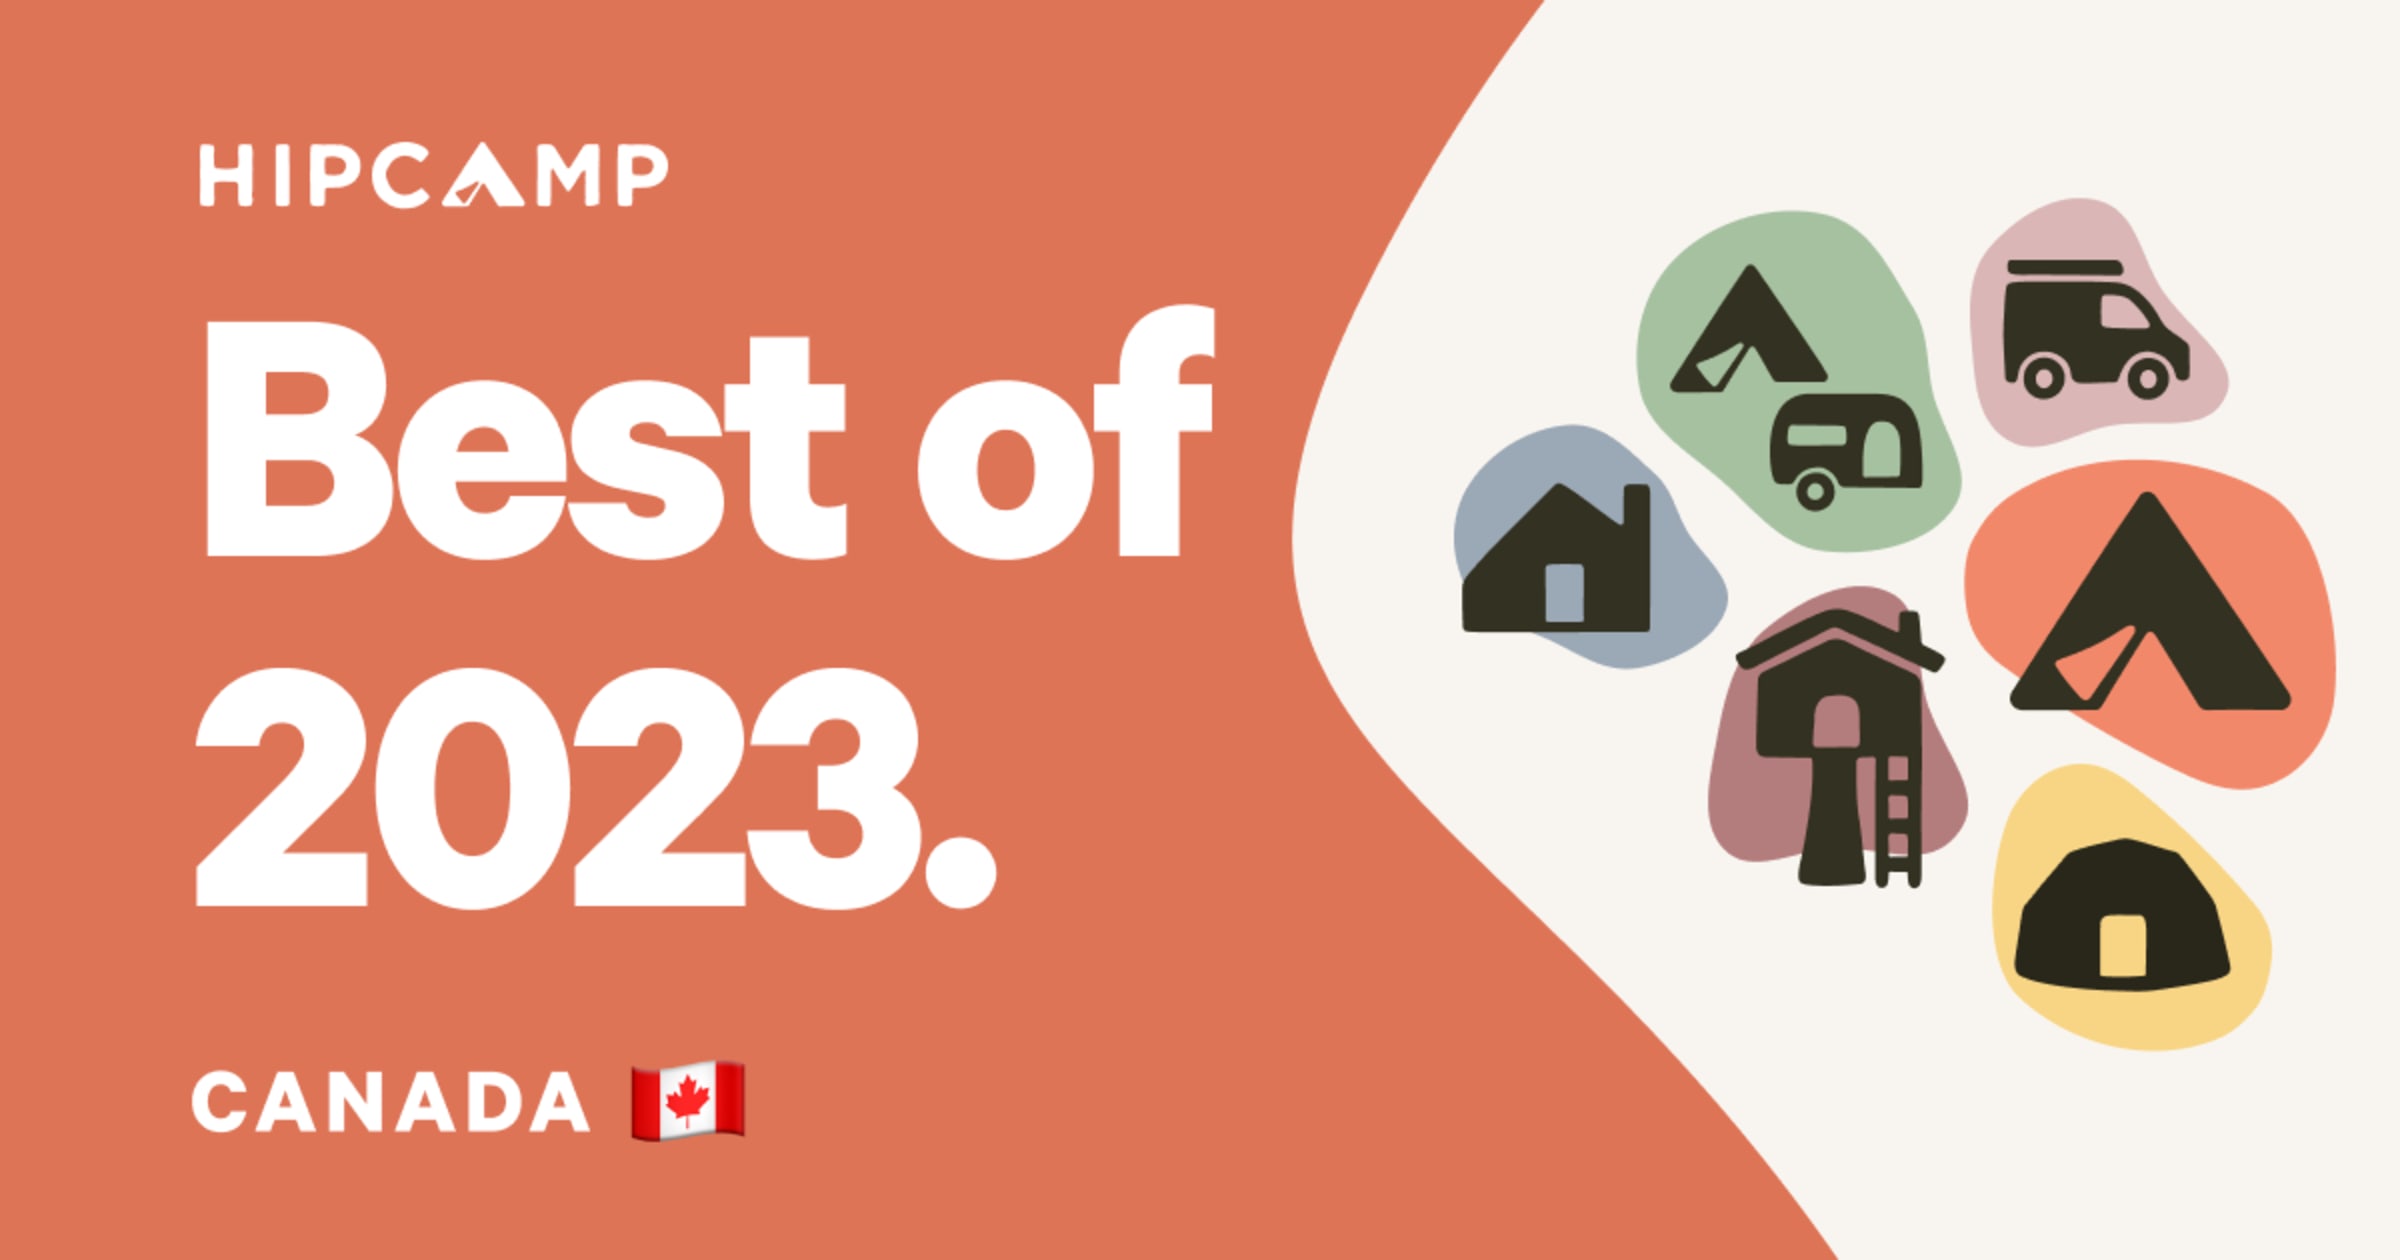 Canada’s Best Hipcamps to Visit in 2023